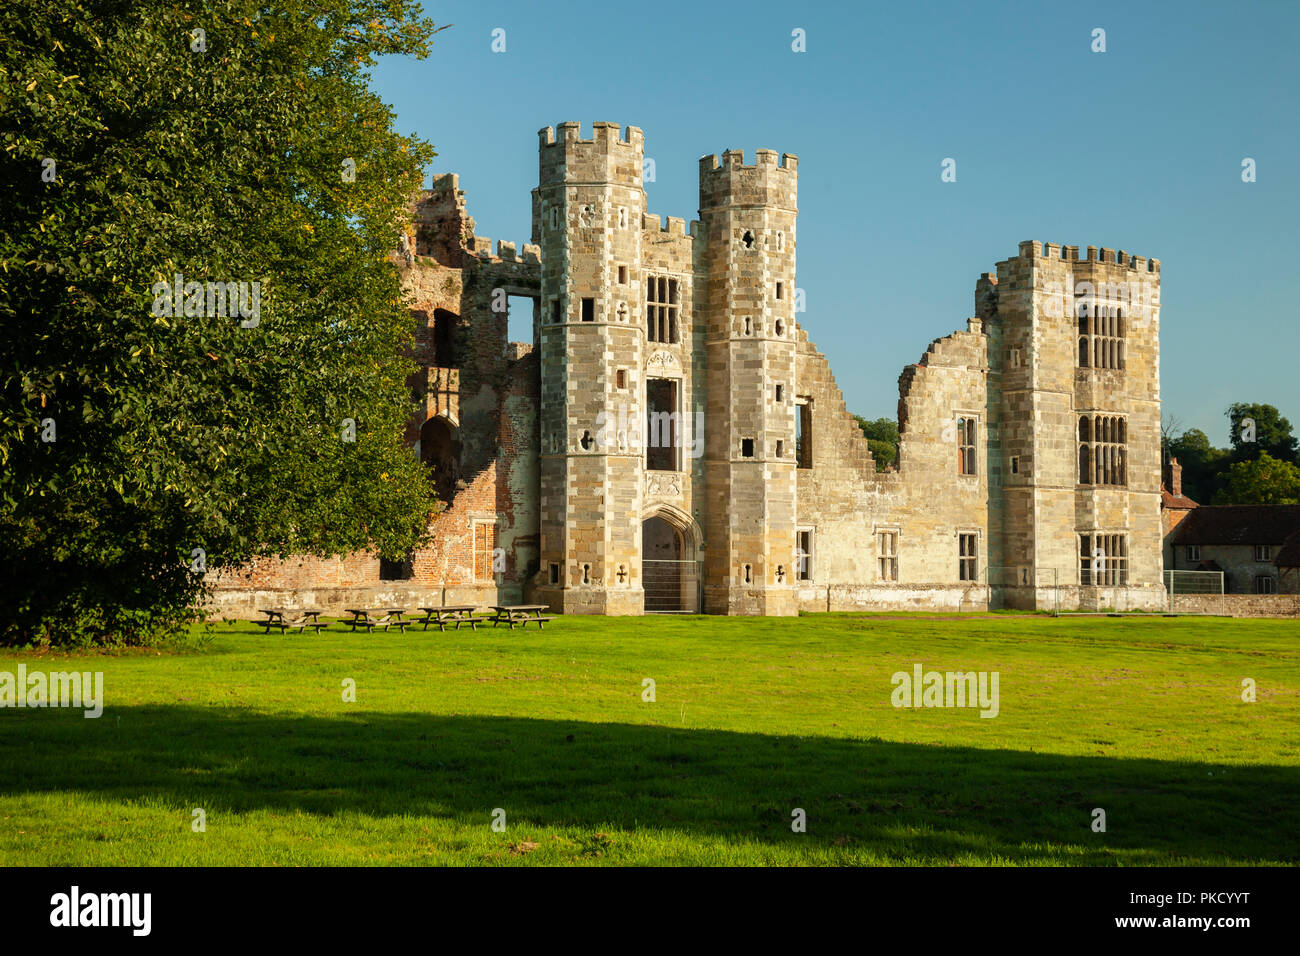 Cowdray House in Midhurst, West Sussex, England. Stock Photo